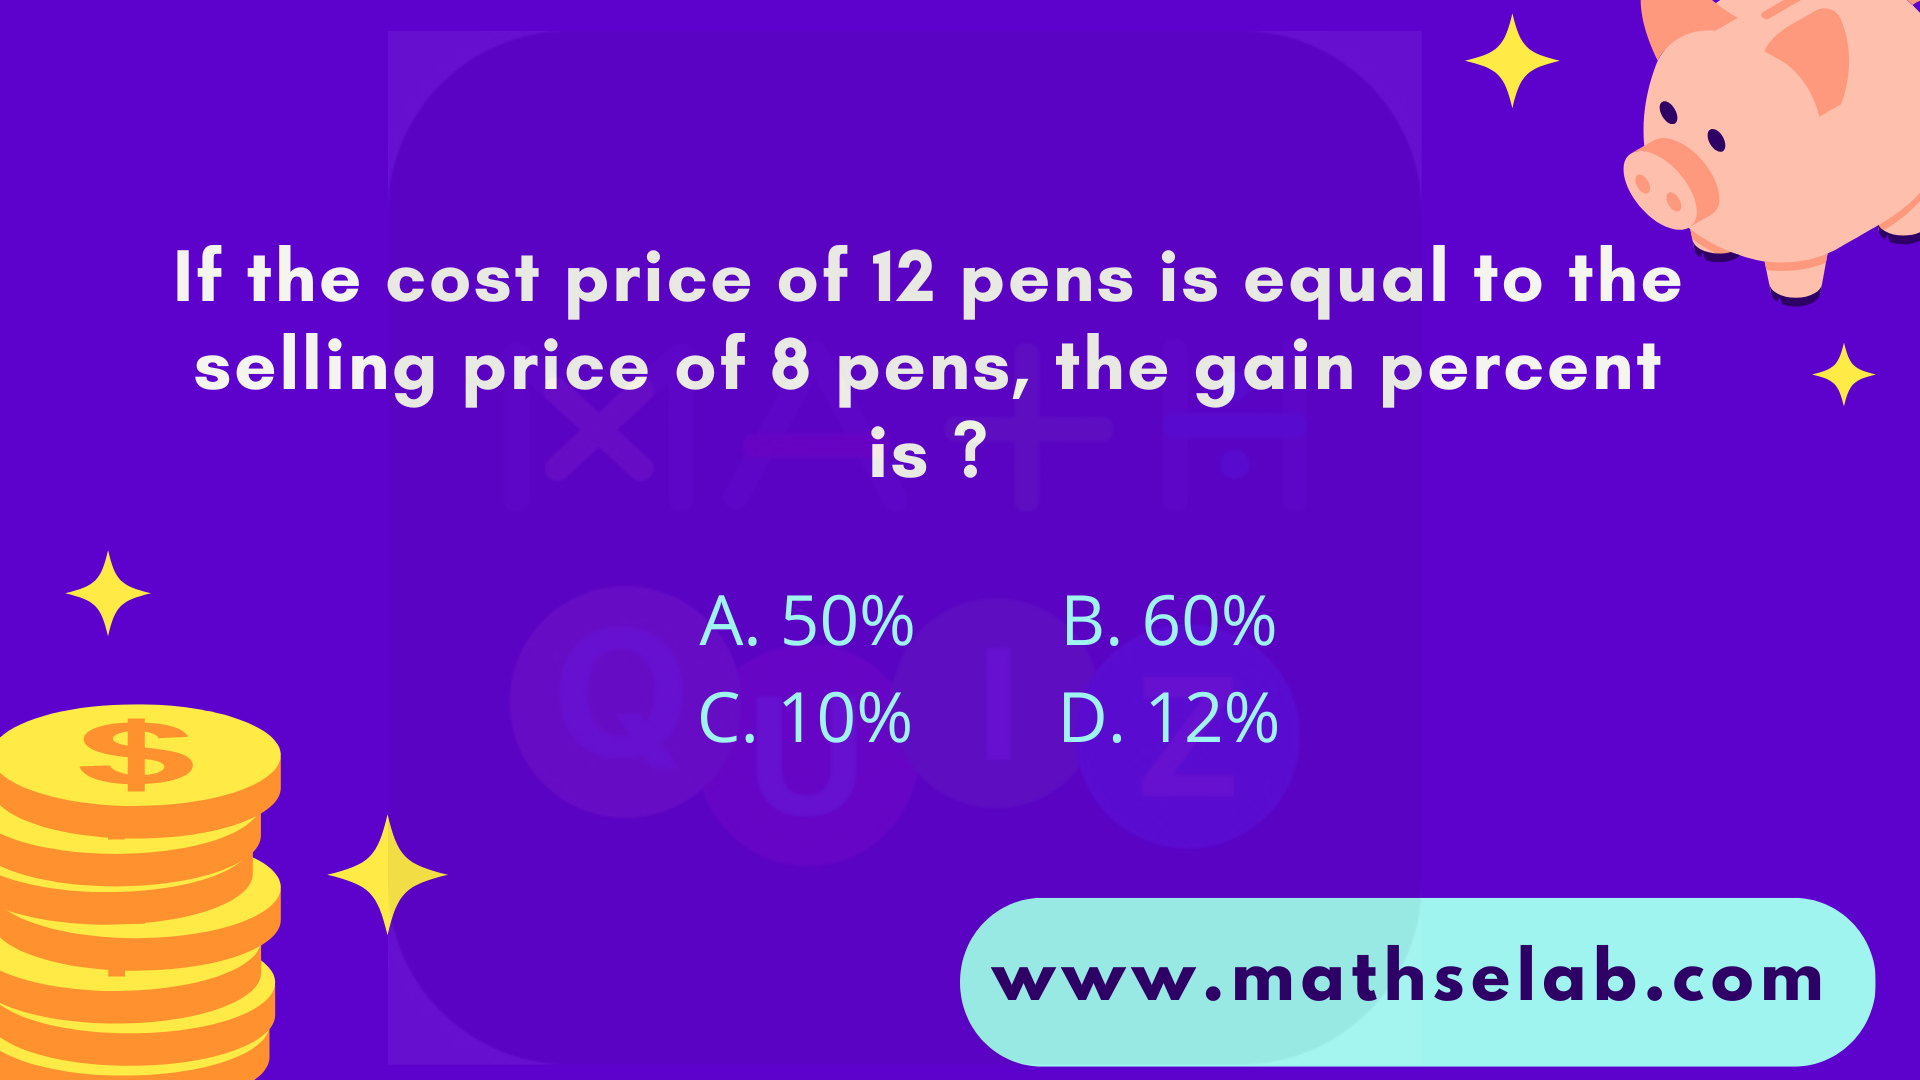 If the cost price of 12 pens is equal to the selling price of 8 pens, the gain percent is ?